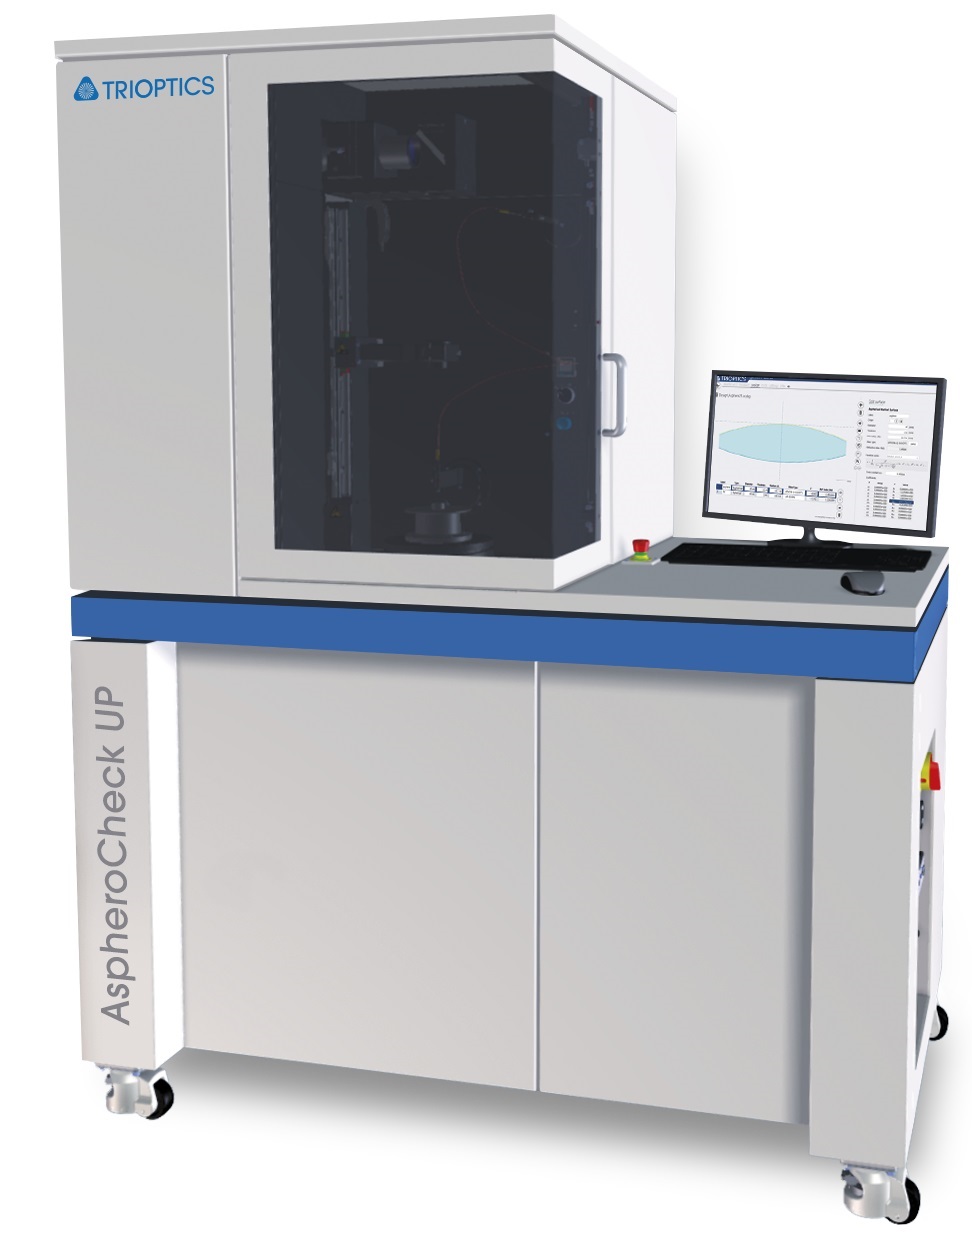 AspheroCheck UP with fully automated measurement